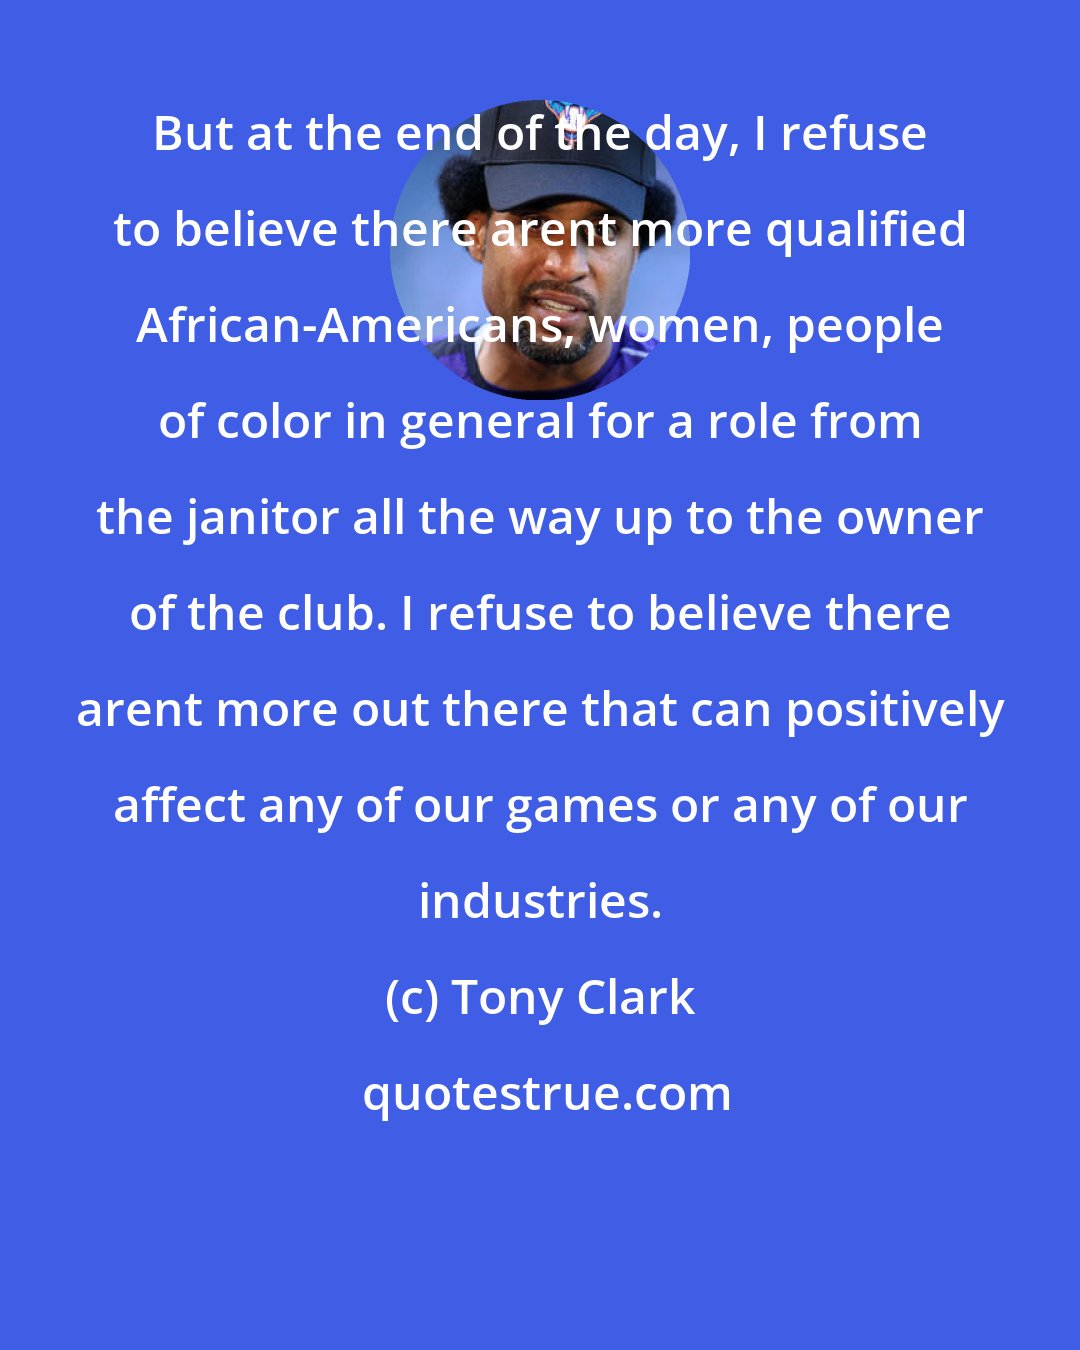 Tony Clark: But at the end of the day, I refuse to believe there arent more qualified African-Americans, women, people of color in general for a role from the janitor all the way up to the owner of the club. I refuse to believe there arent more out there that can positively affect any of our games or any of our industries.